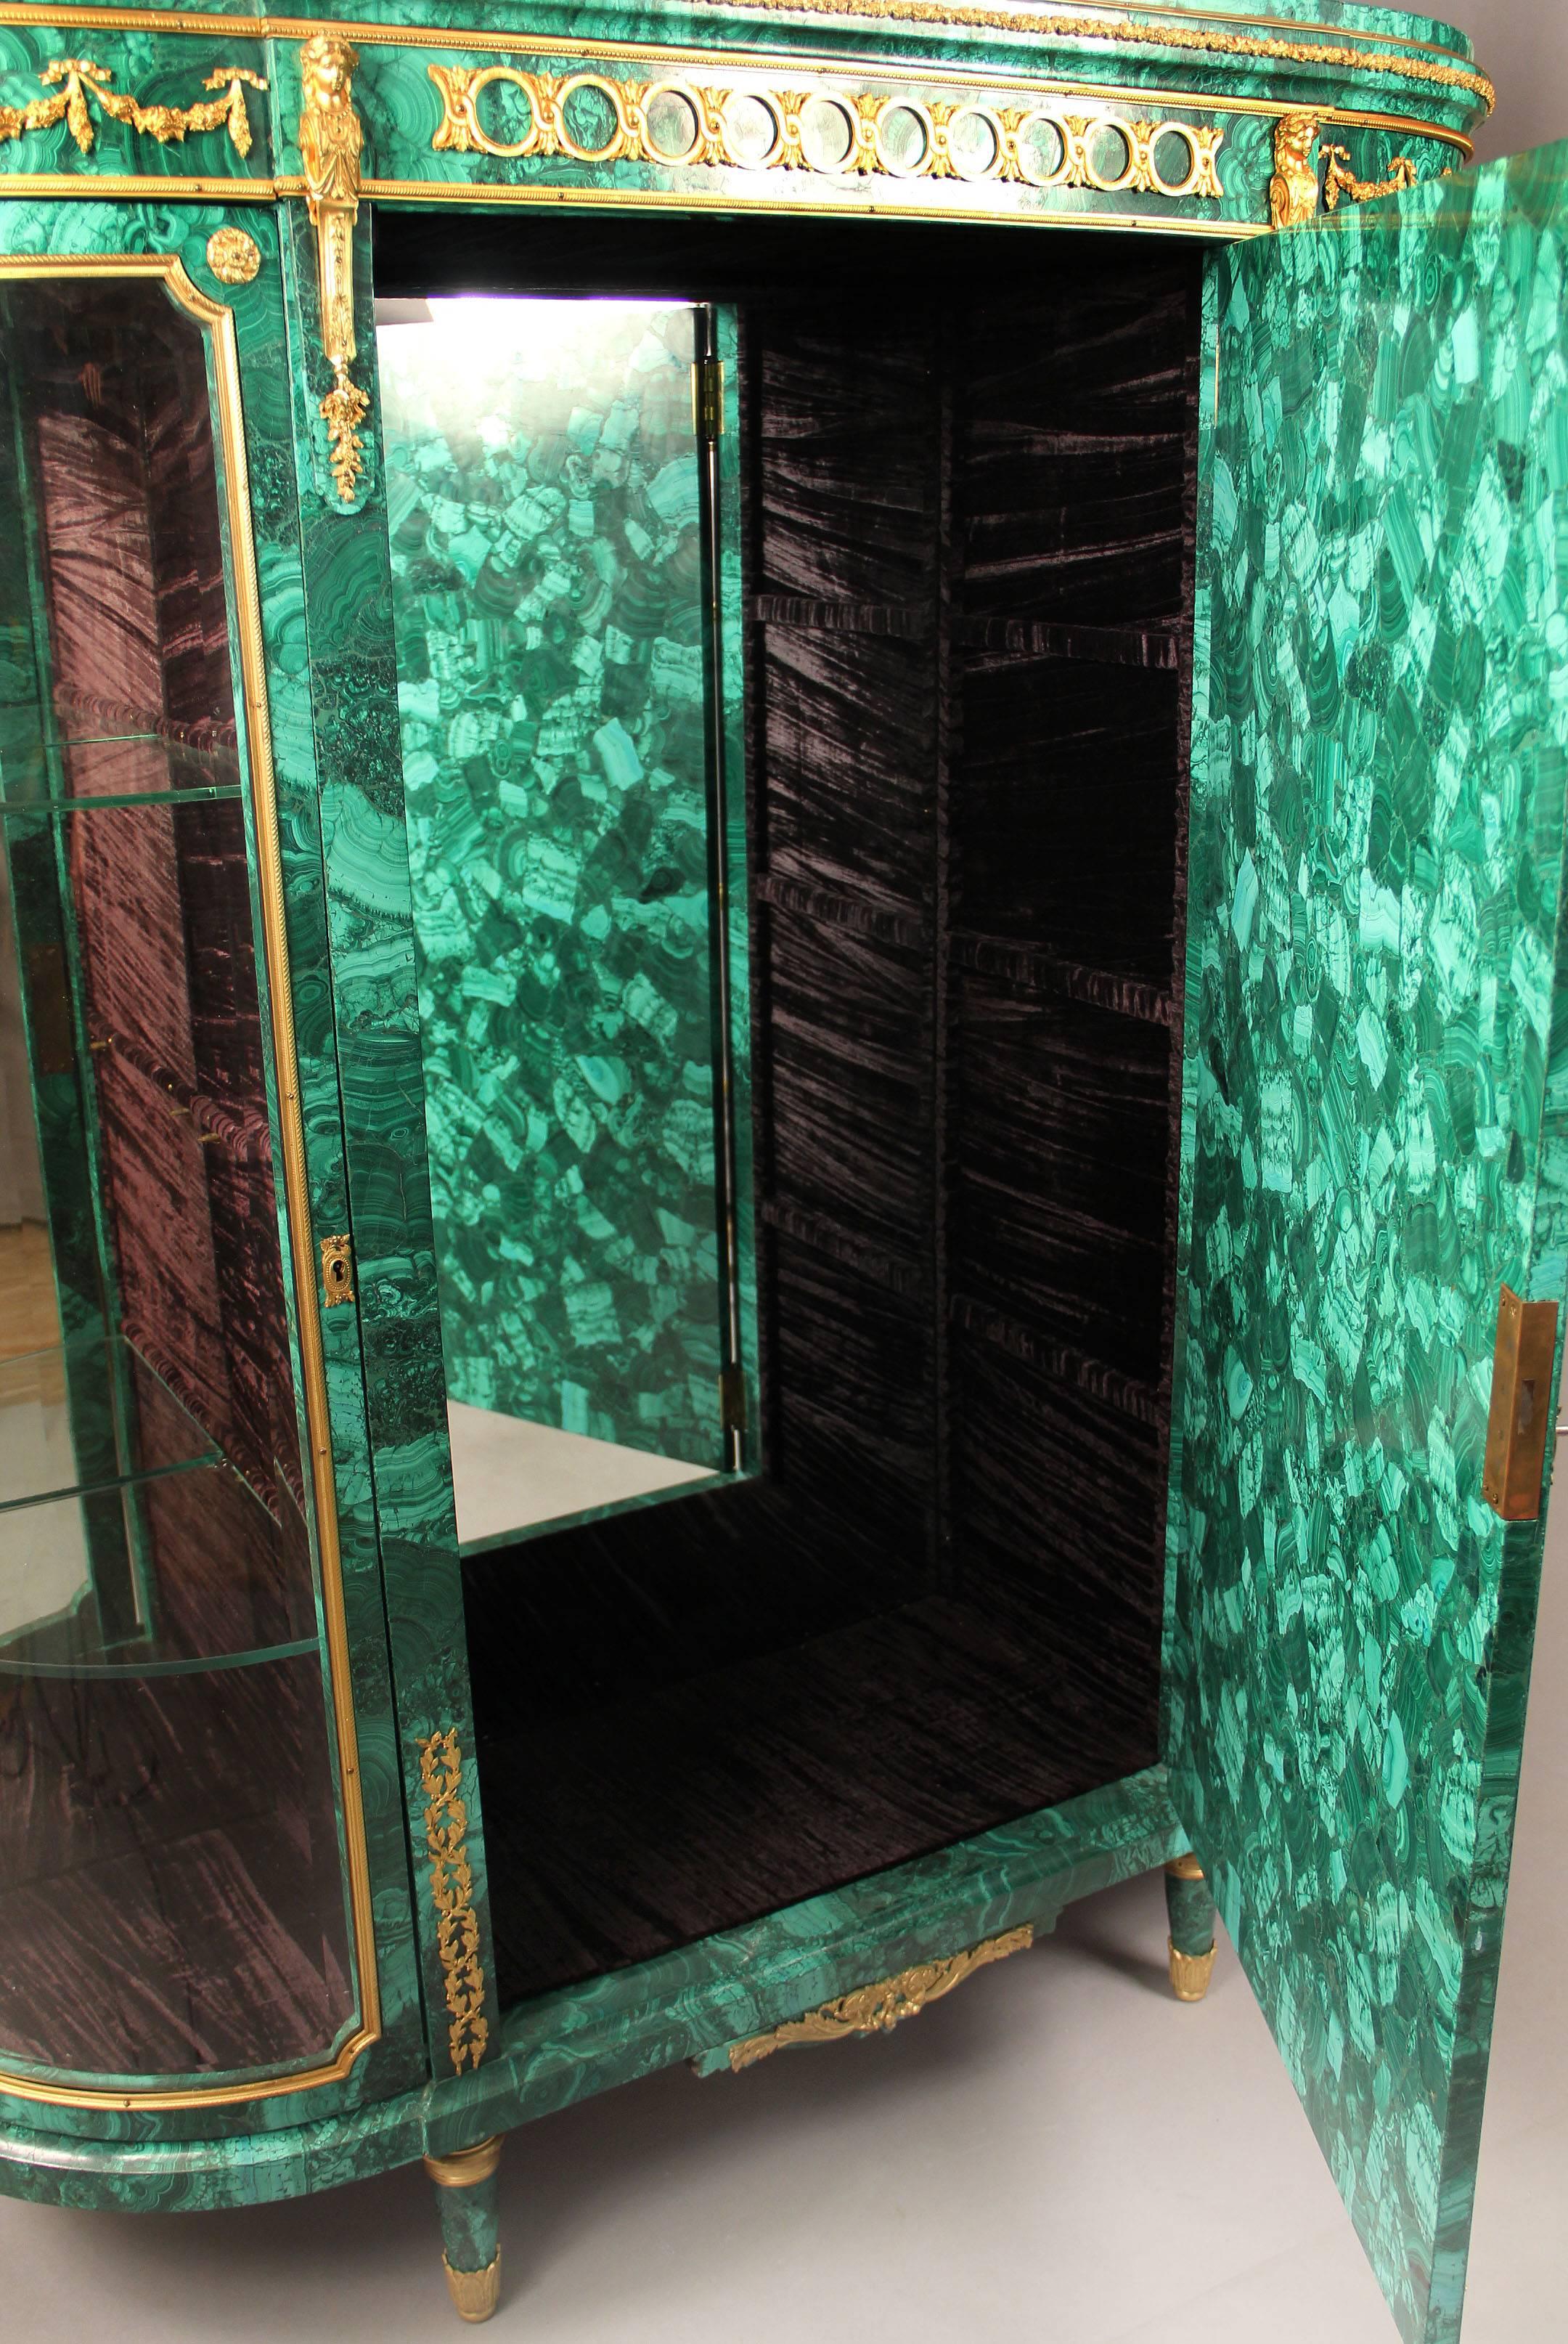 A very fine early 20th century gilt bronze-mounted Louis XVI style Malachite Vitrine cabinet

The D-shaped top over central cupboard door flanked by two glazed cavetto doors opening to glass shelves, raised on short tapering legs, the central door